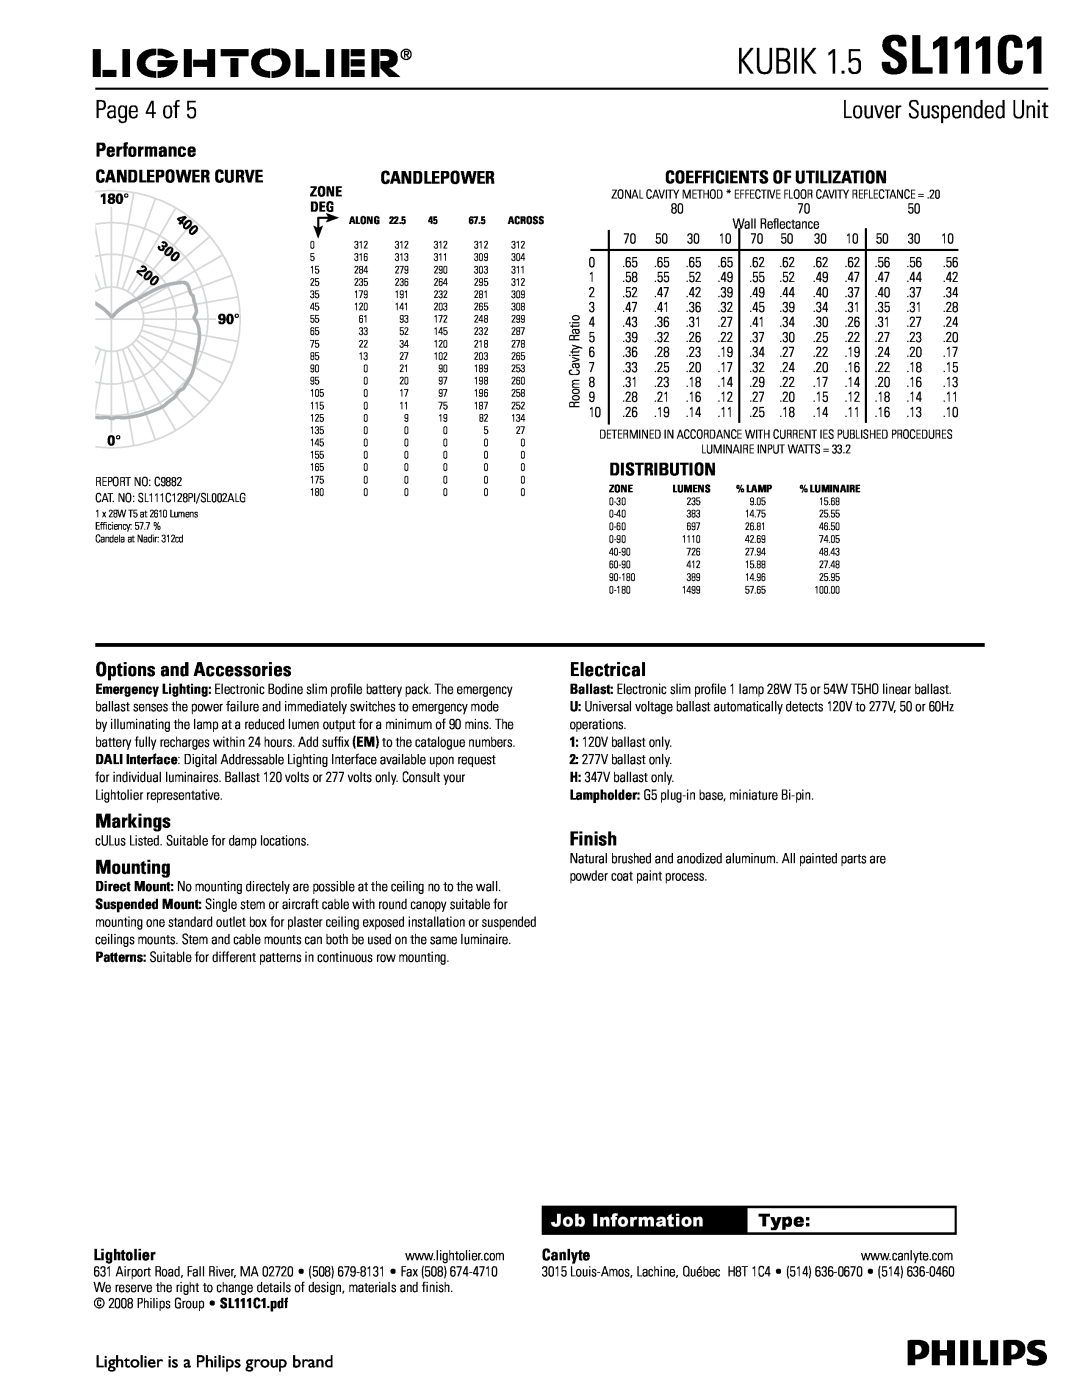 Lightolier KUBIK 1.5 SL111C1, Page 4 of, Performance, Options and Accessories, Markings, Mounting, Electrical, Finish 